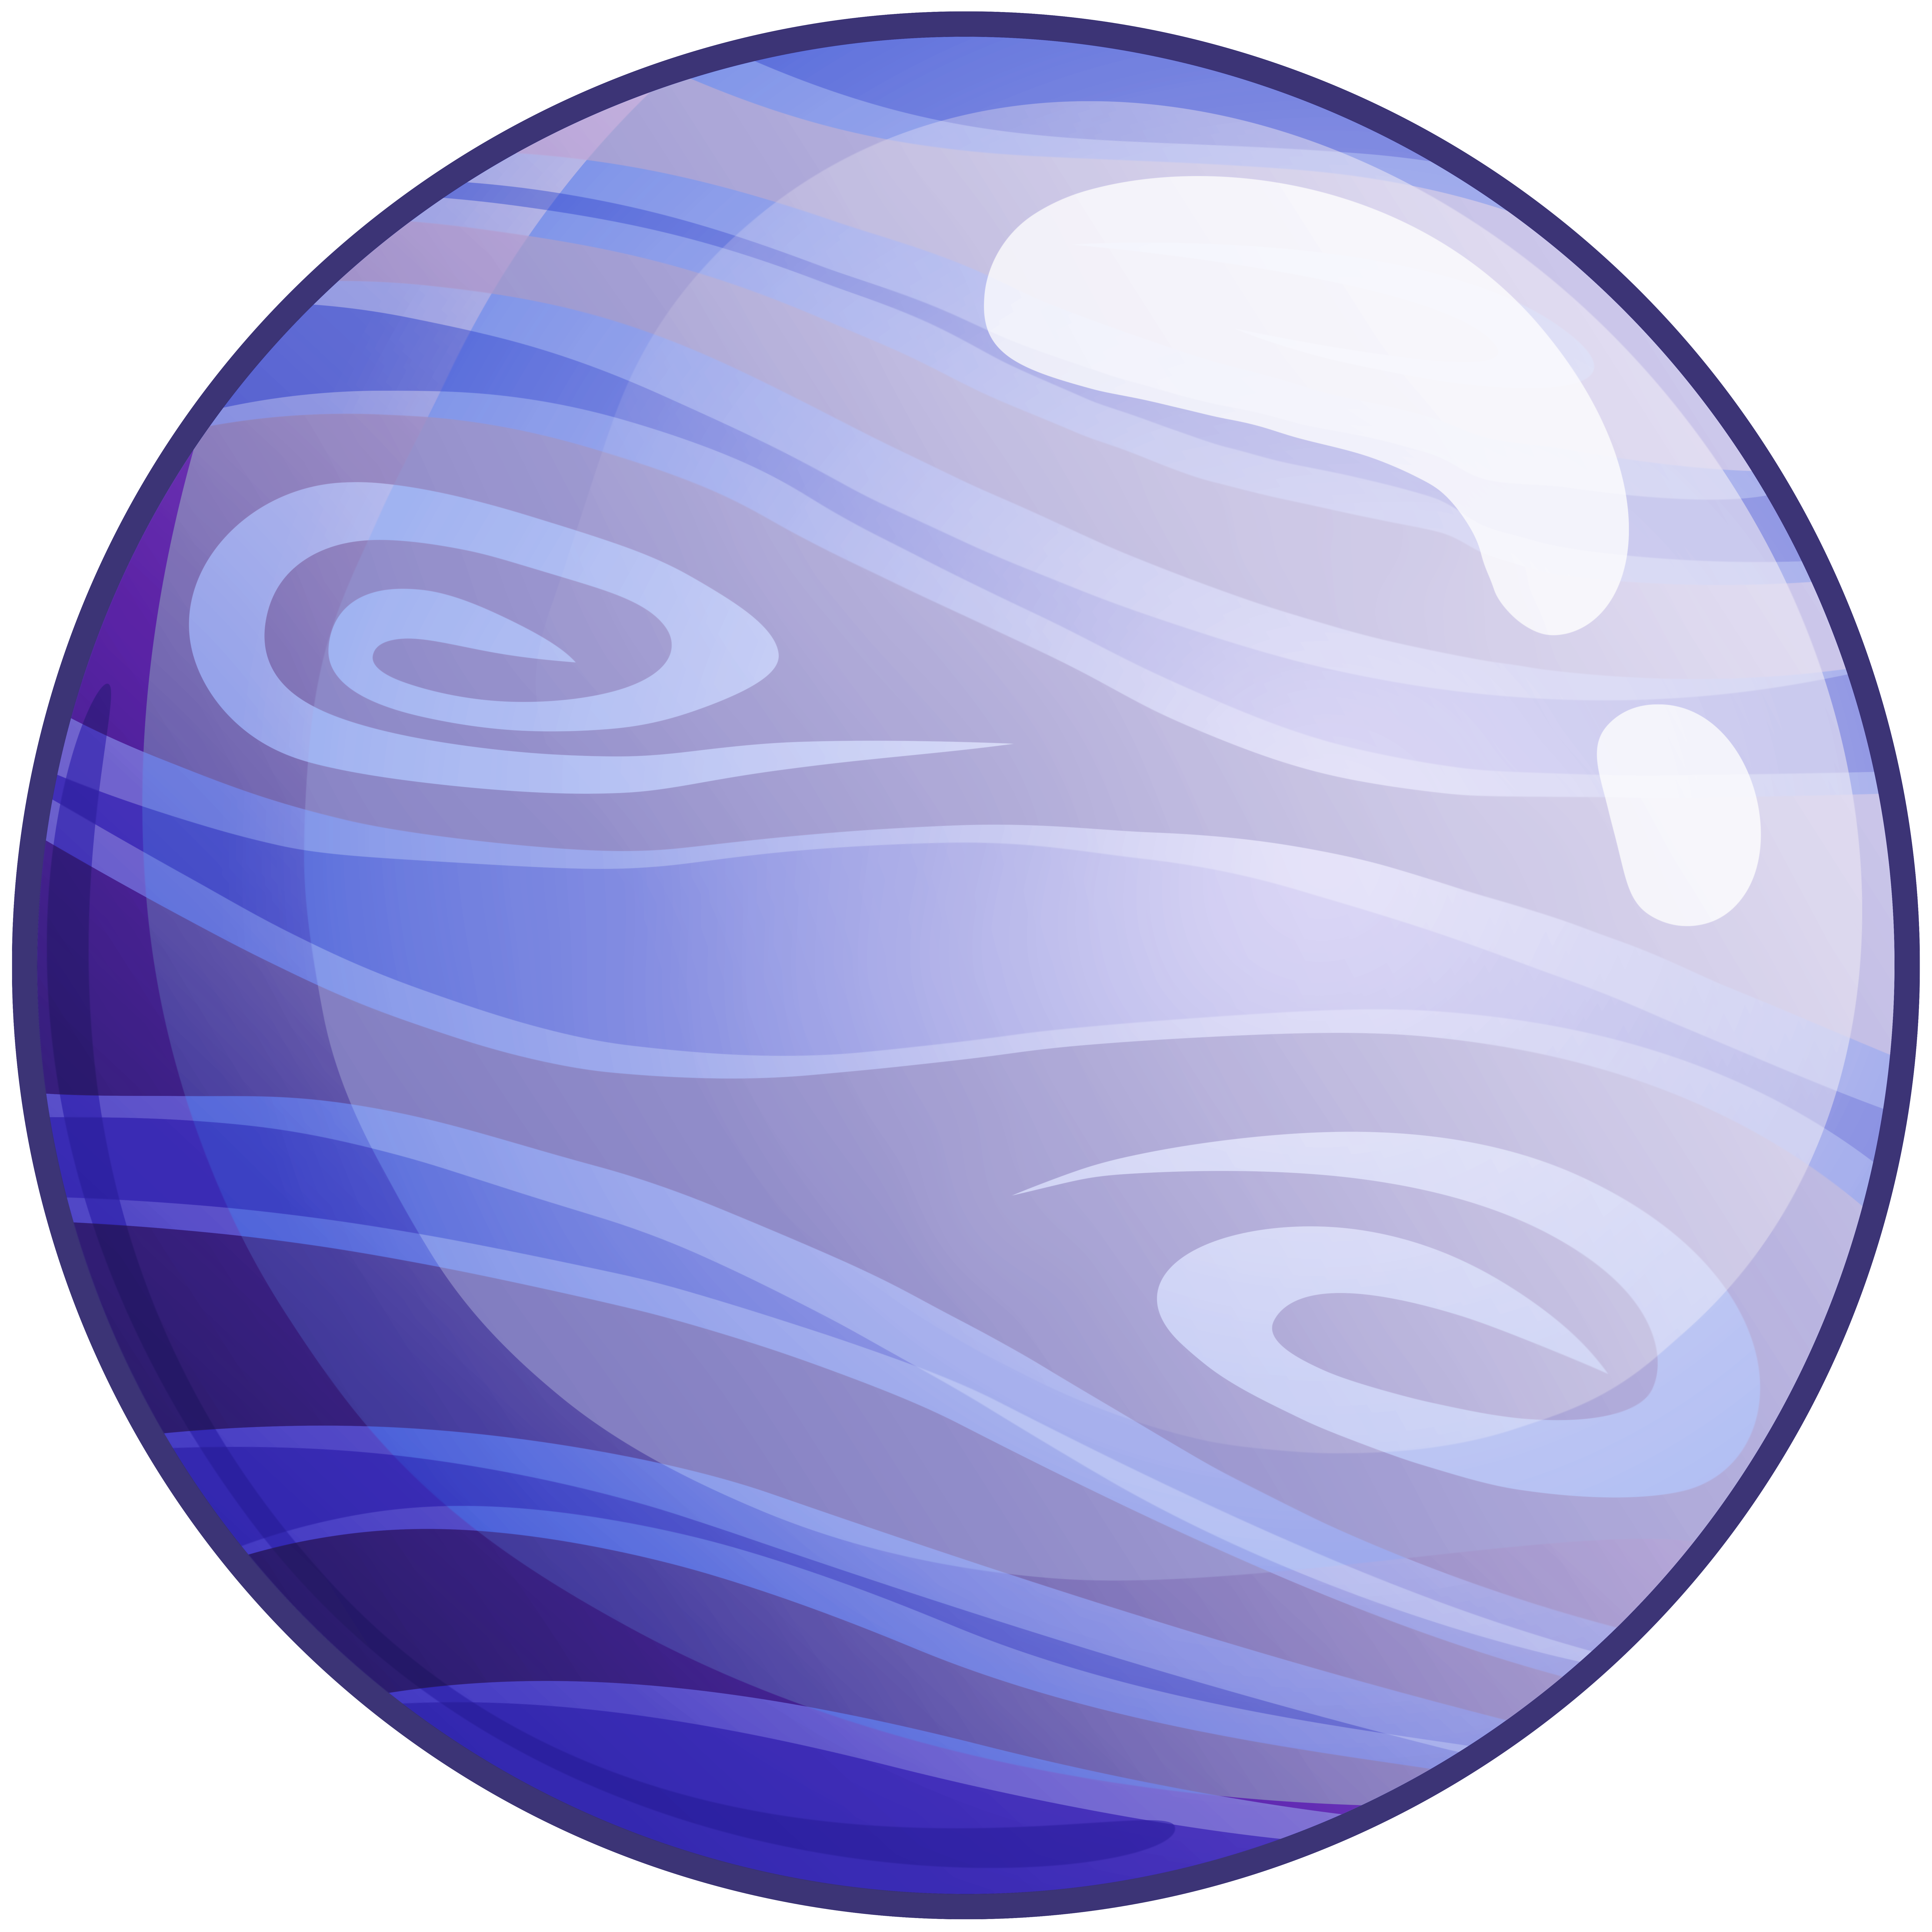 Clip Arts Related To : Neptune PNG Clip Art - Best WEB Clipart. view all .....